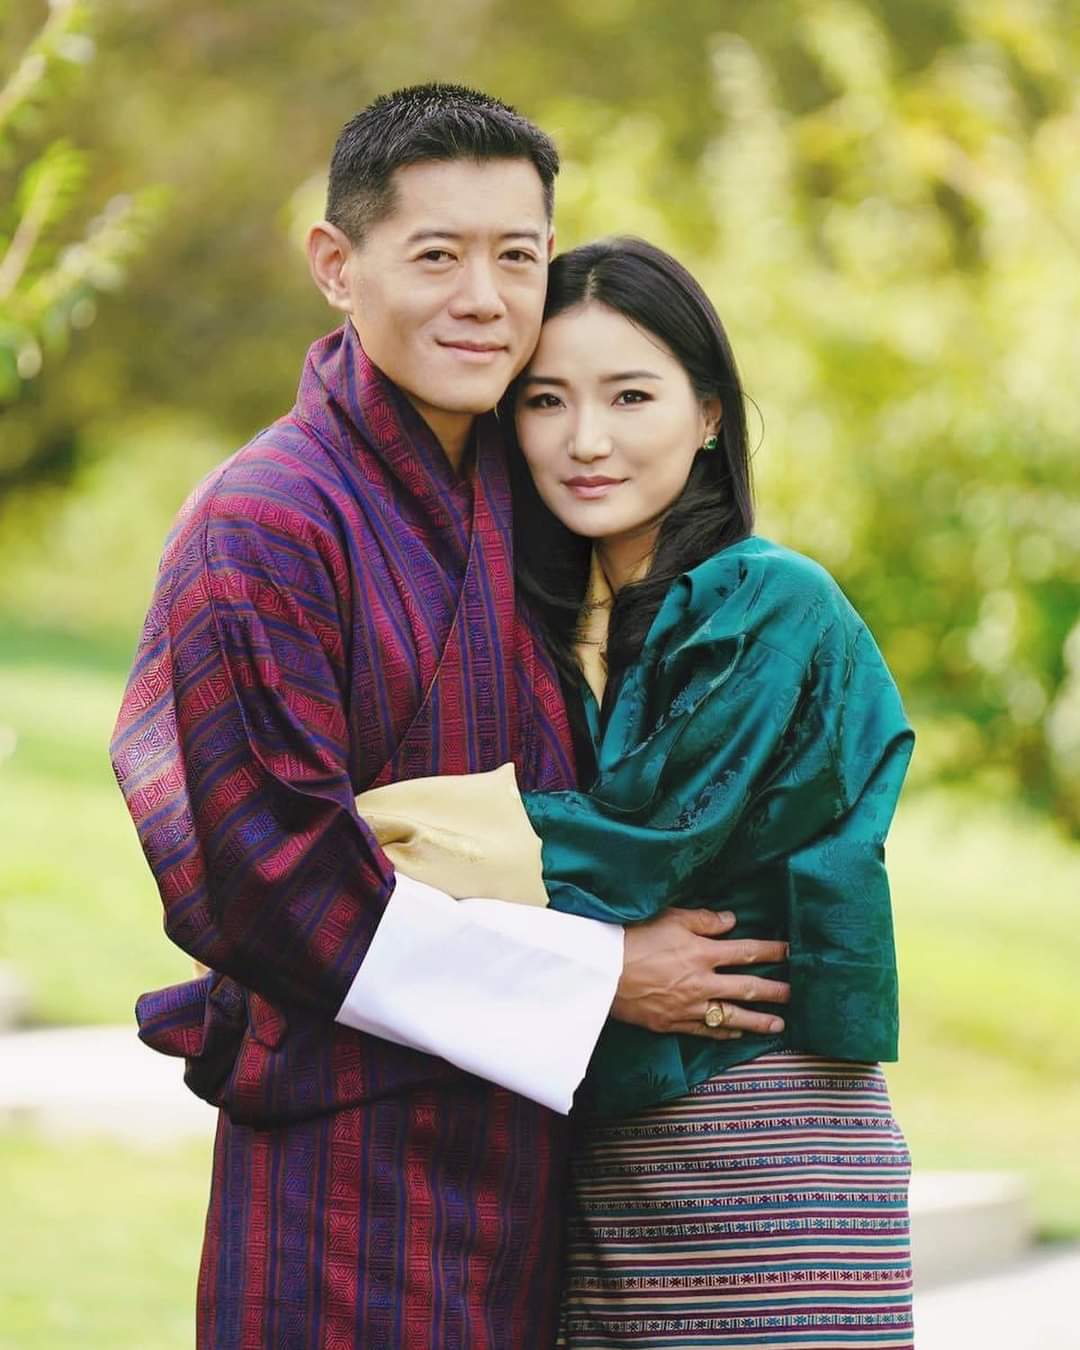 The Eyes Of The Royal Couple Of Bhutan